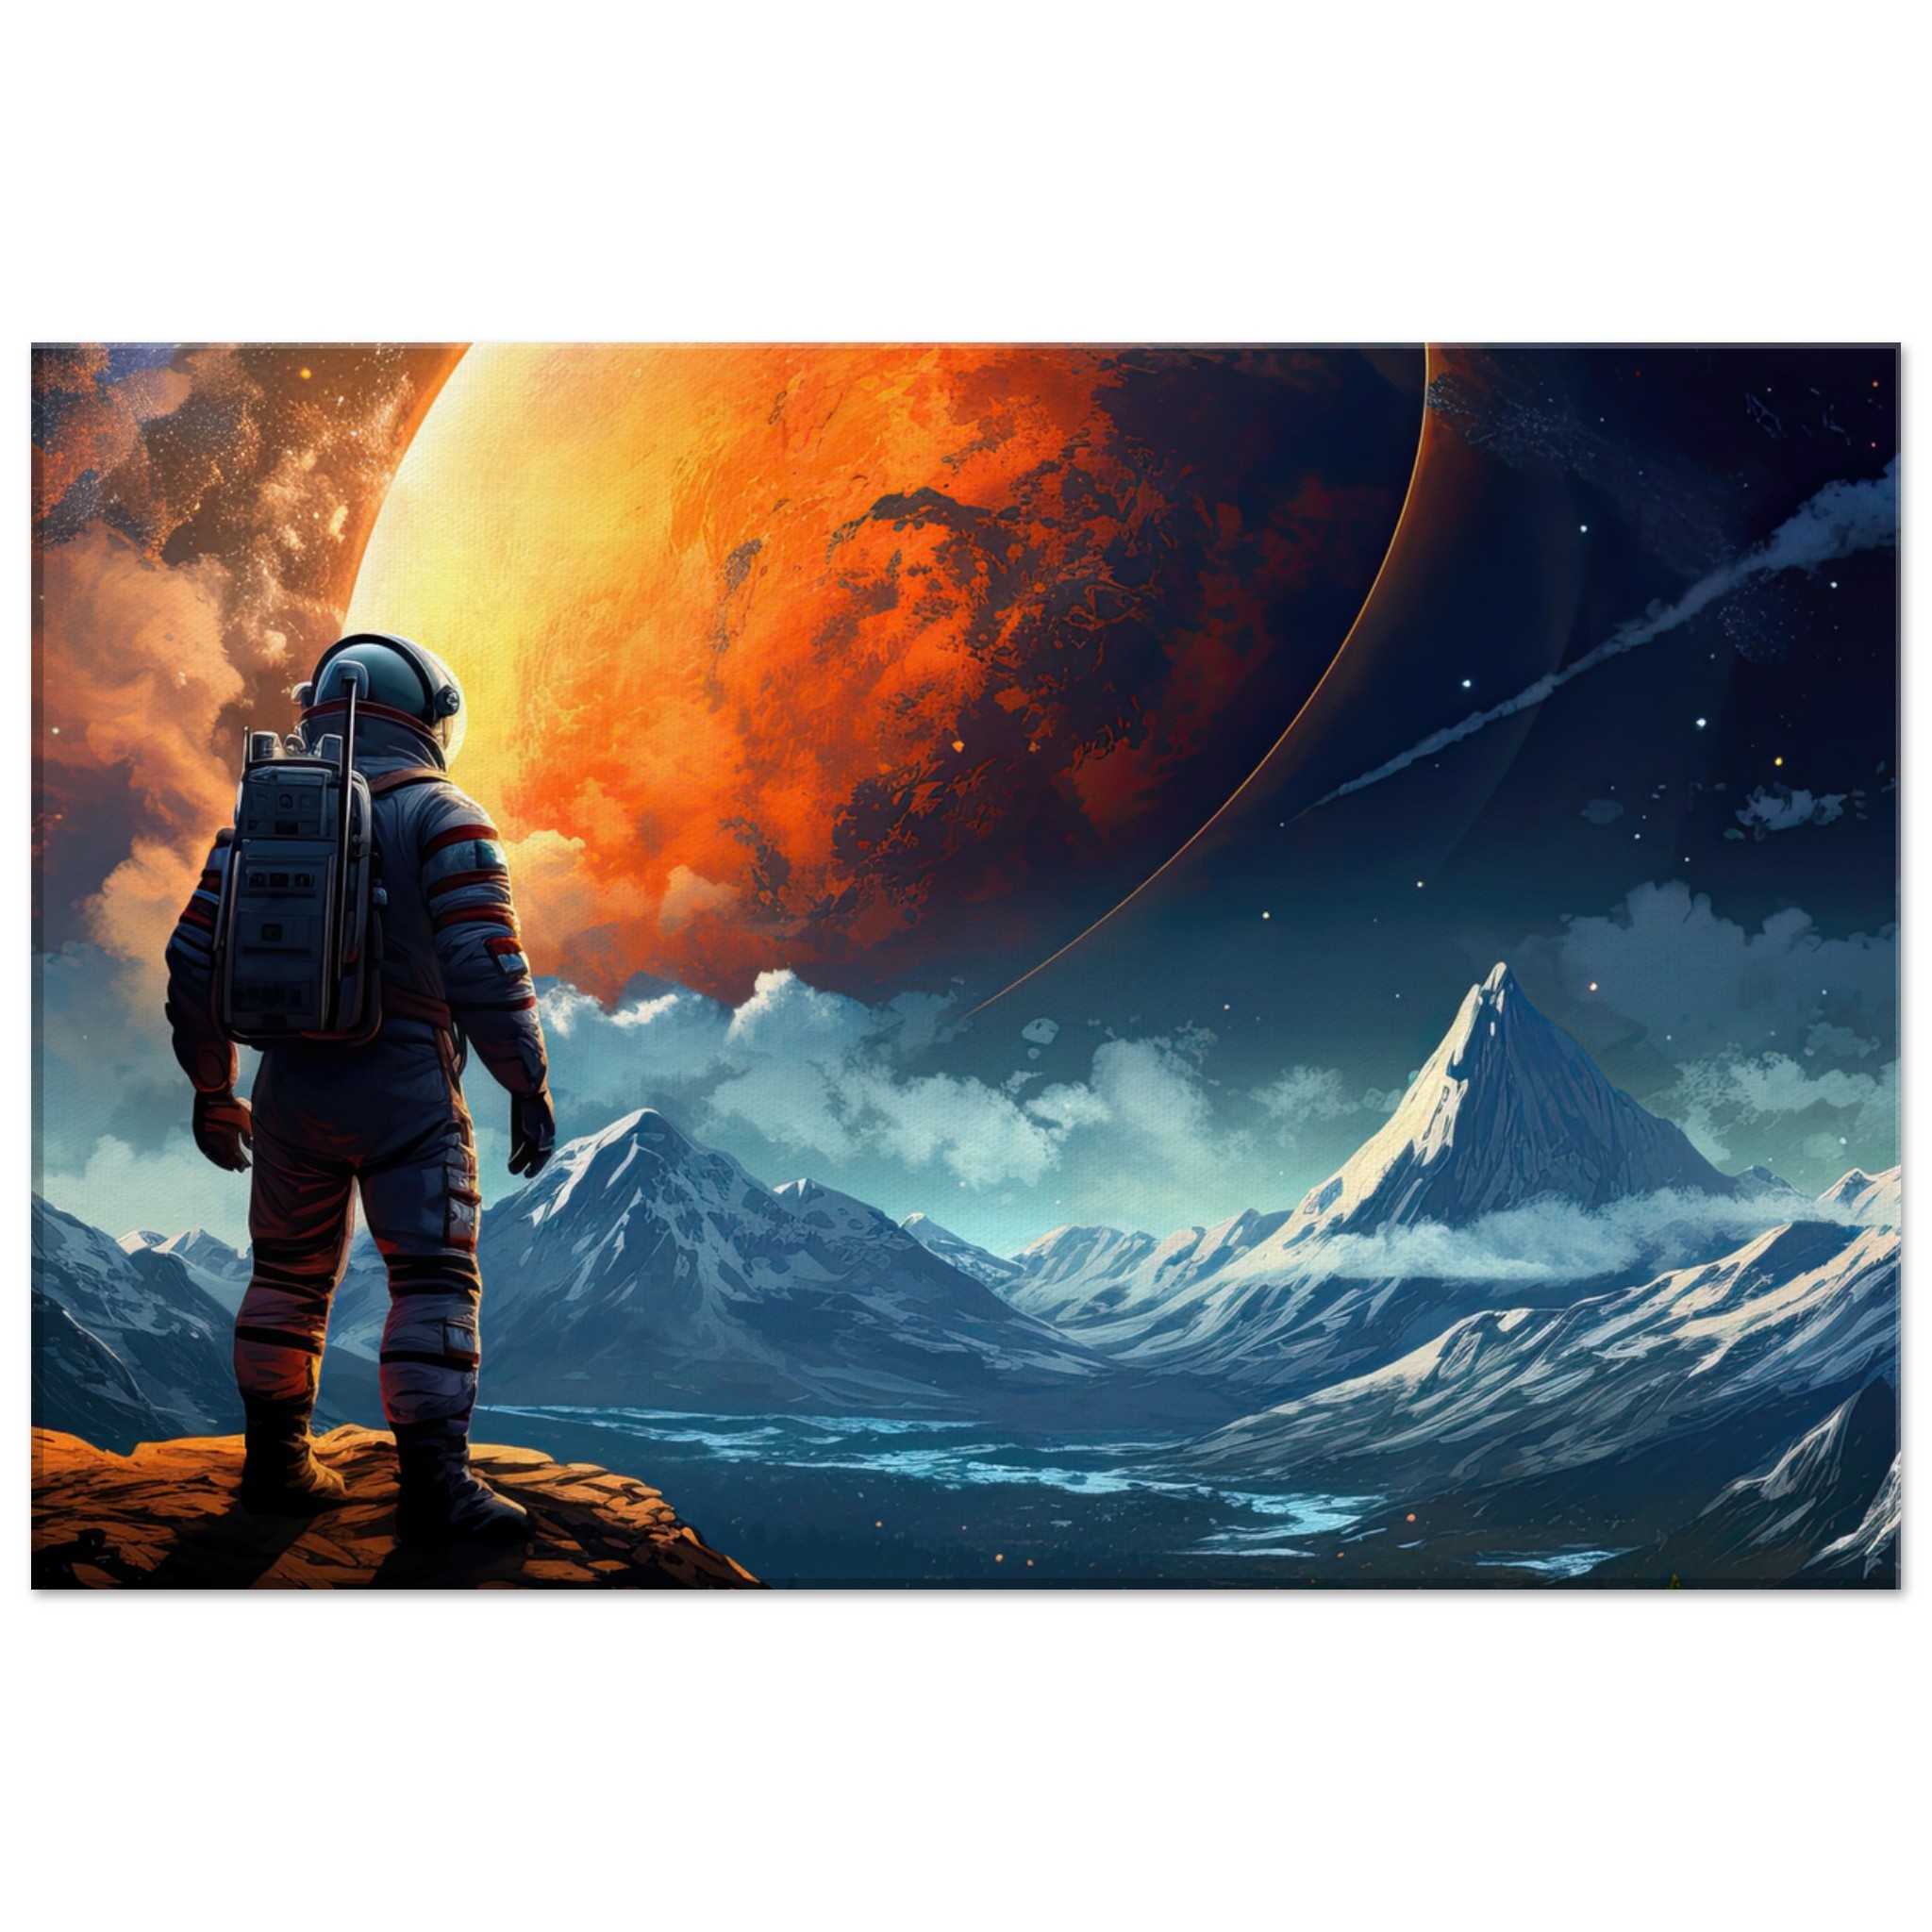 The Great Moon – Astronaut Canvas Print – 40×60 cm / 16×24″, Thick